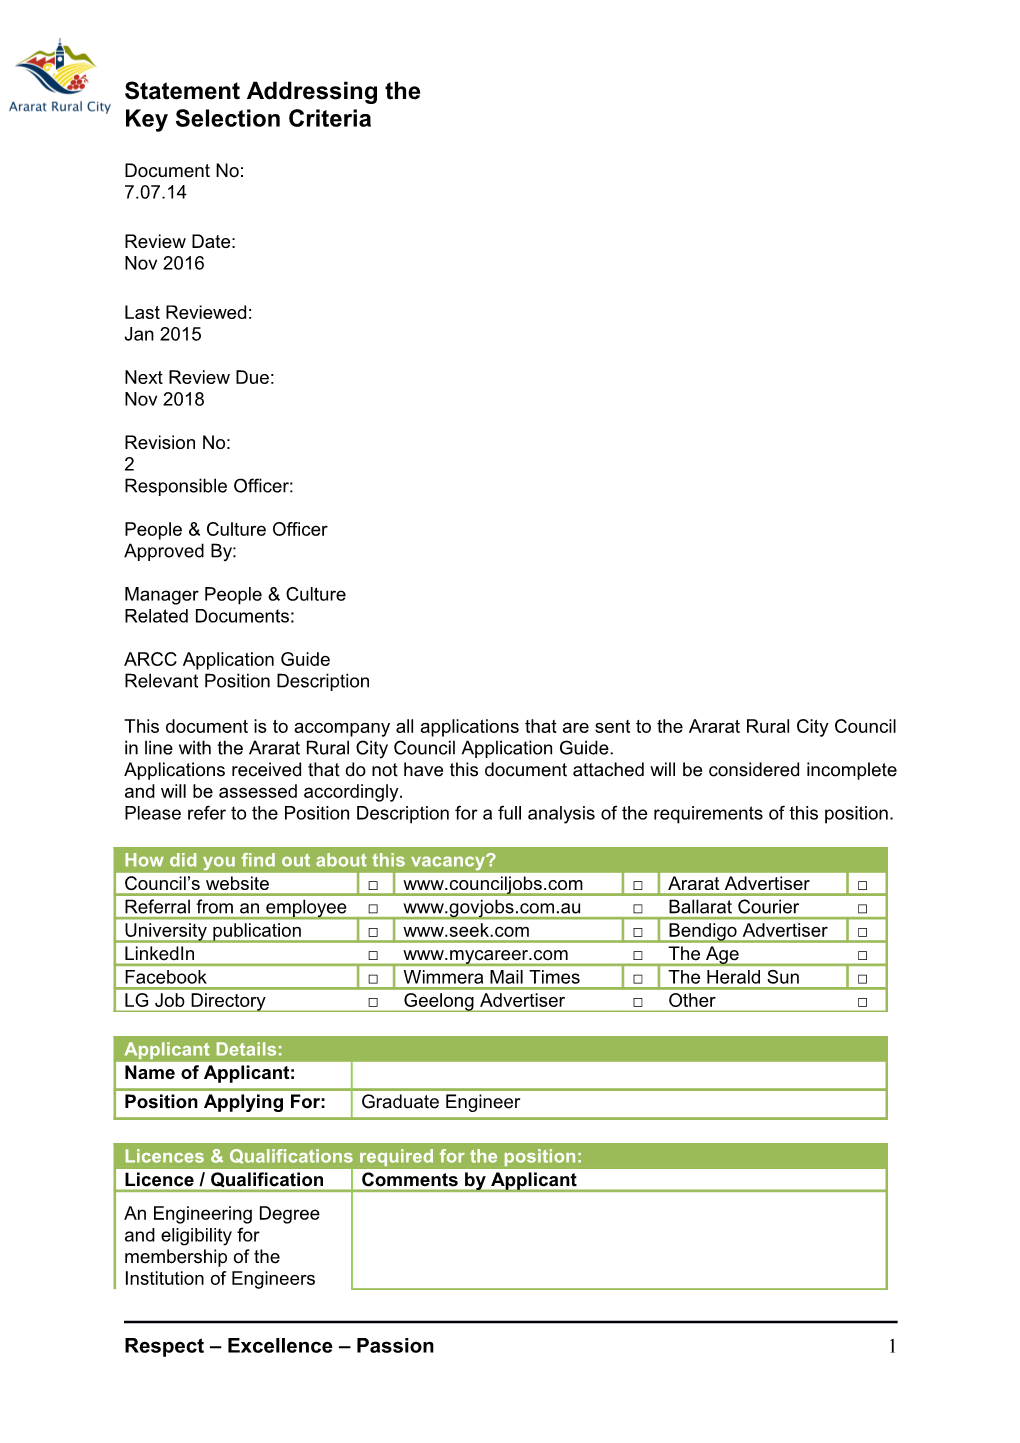 This Document Is to Accompany All Applications That Are Sent to the Ararat Rural City Council